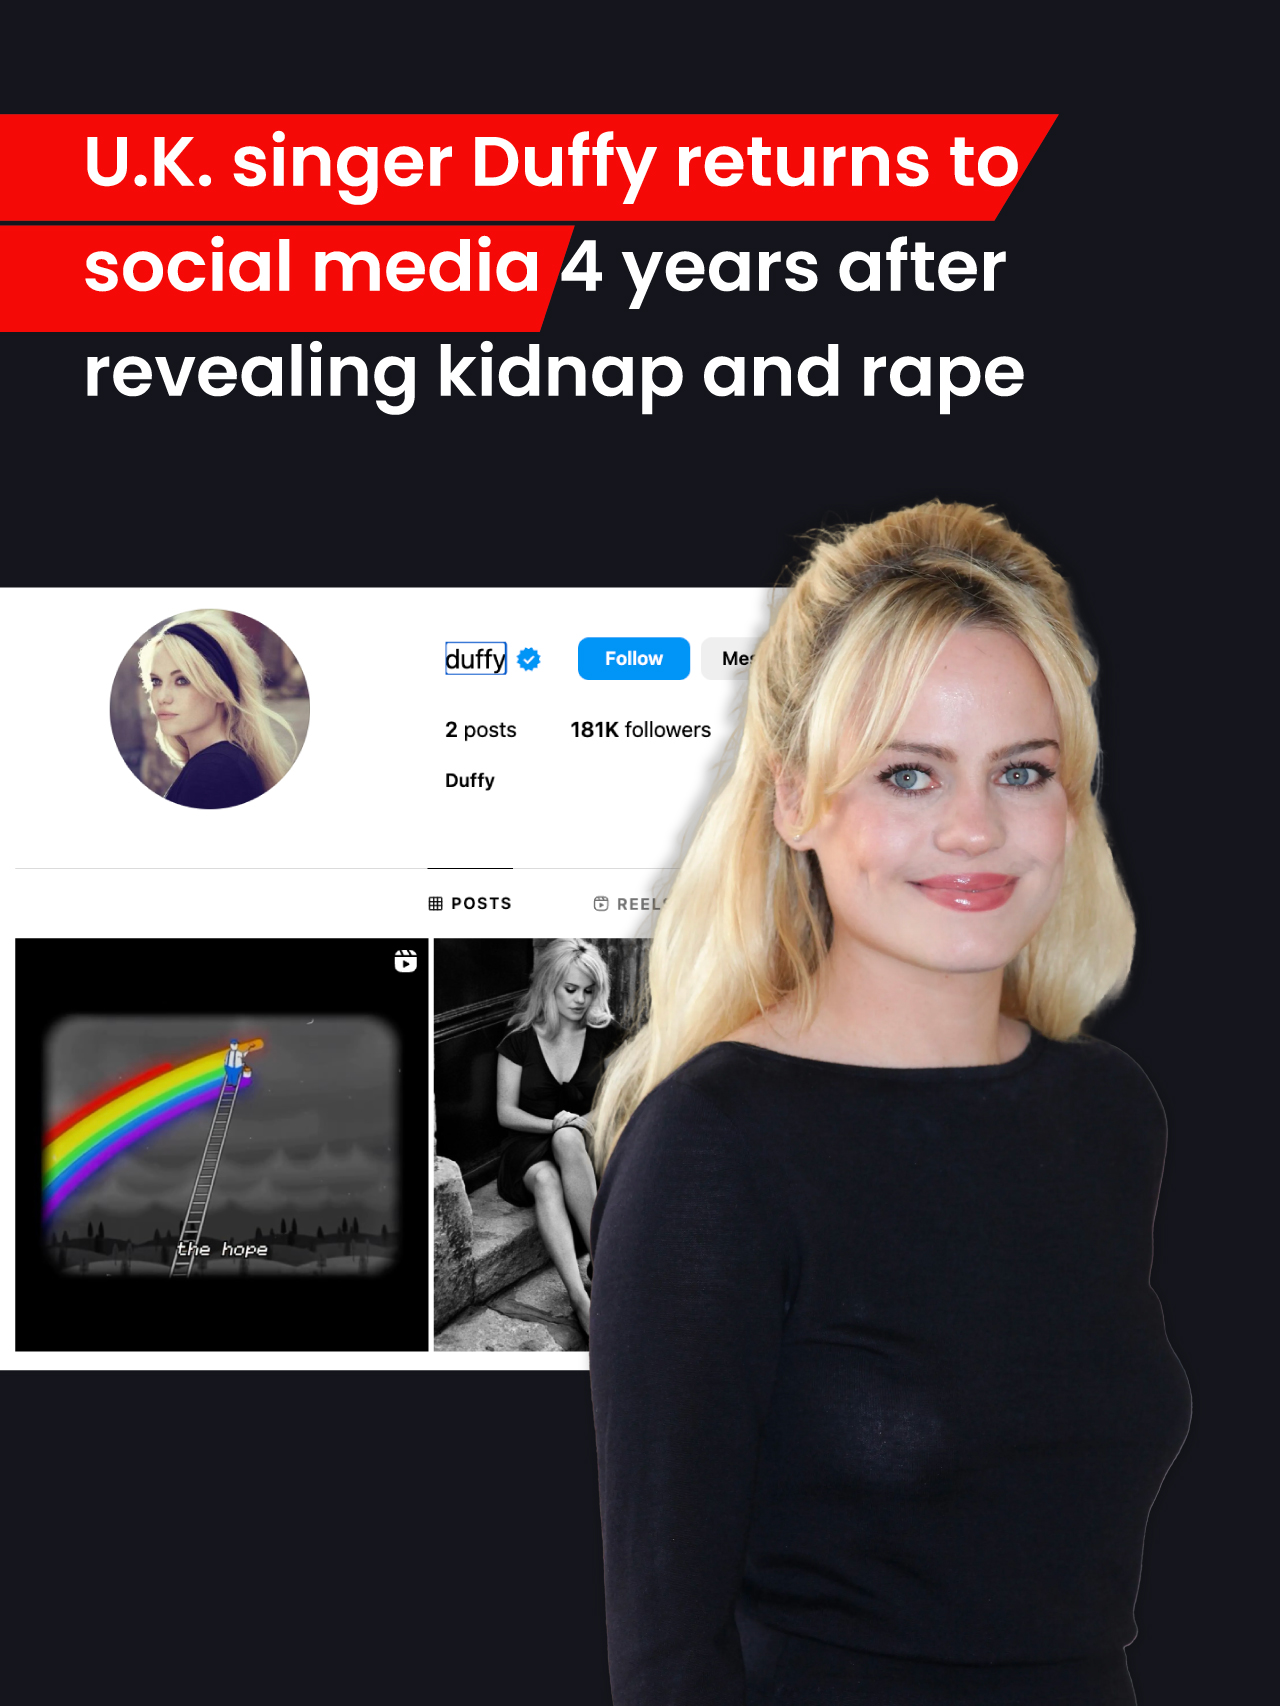 Singer Duffy returns to social media 4 years after revealing kidnap and rape